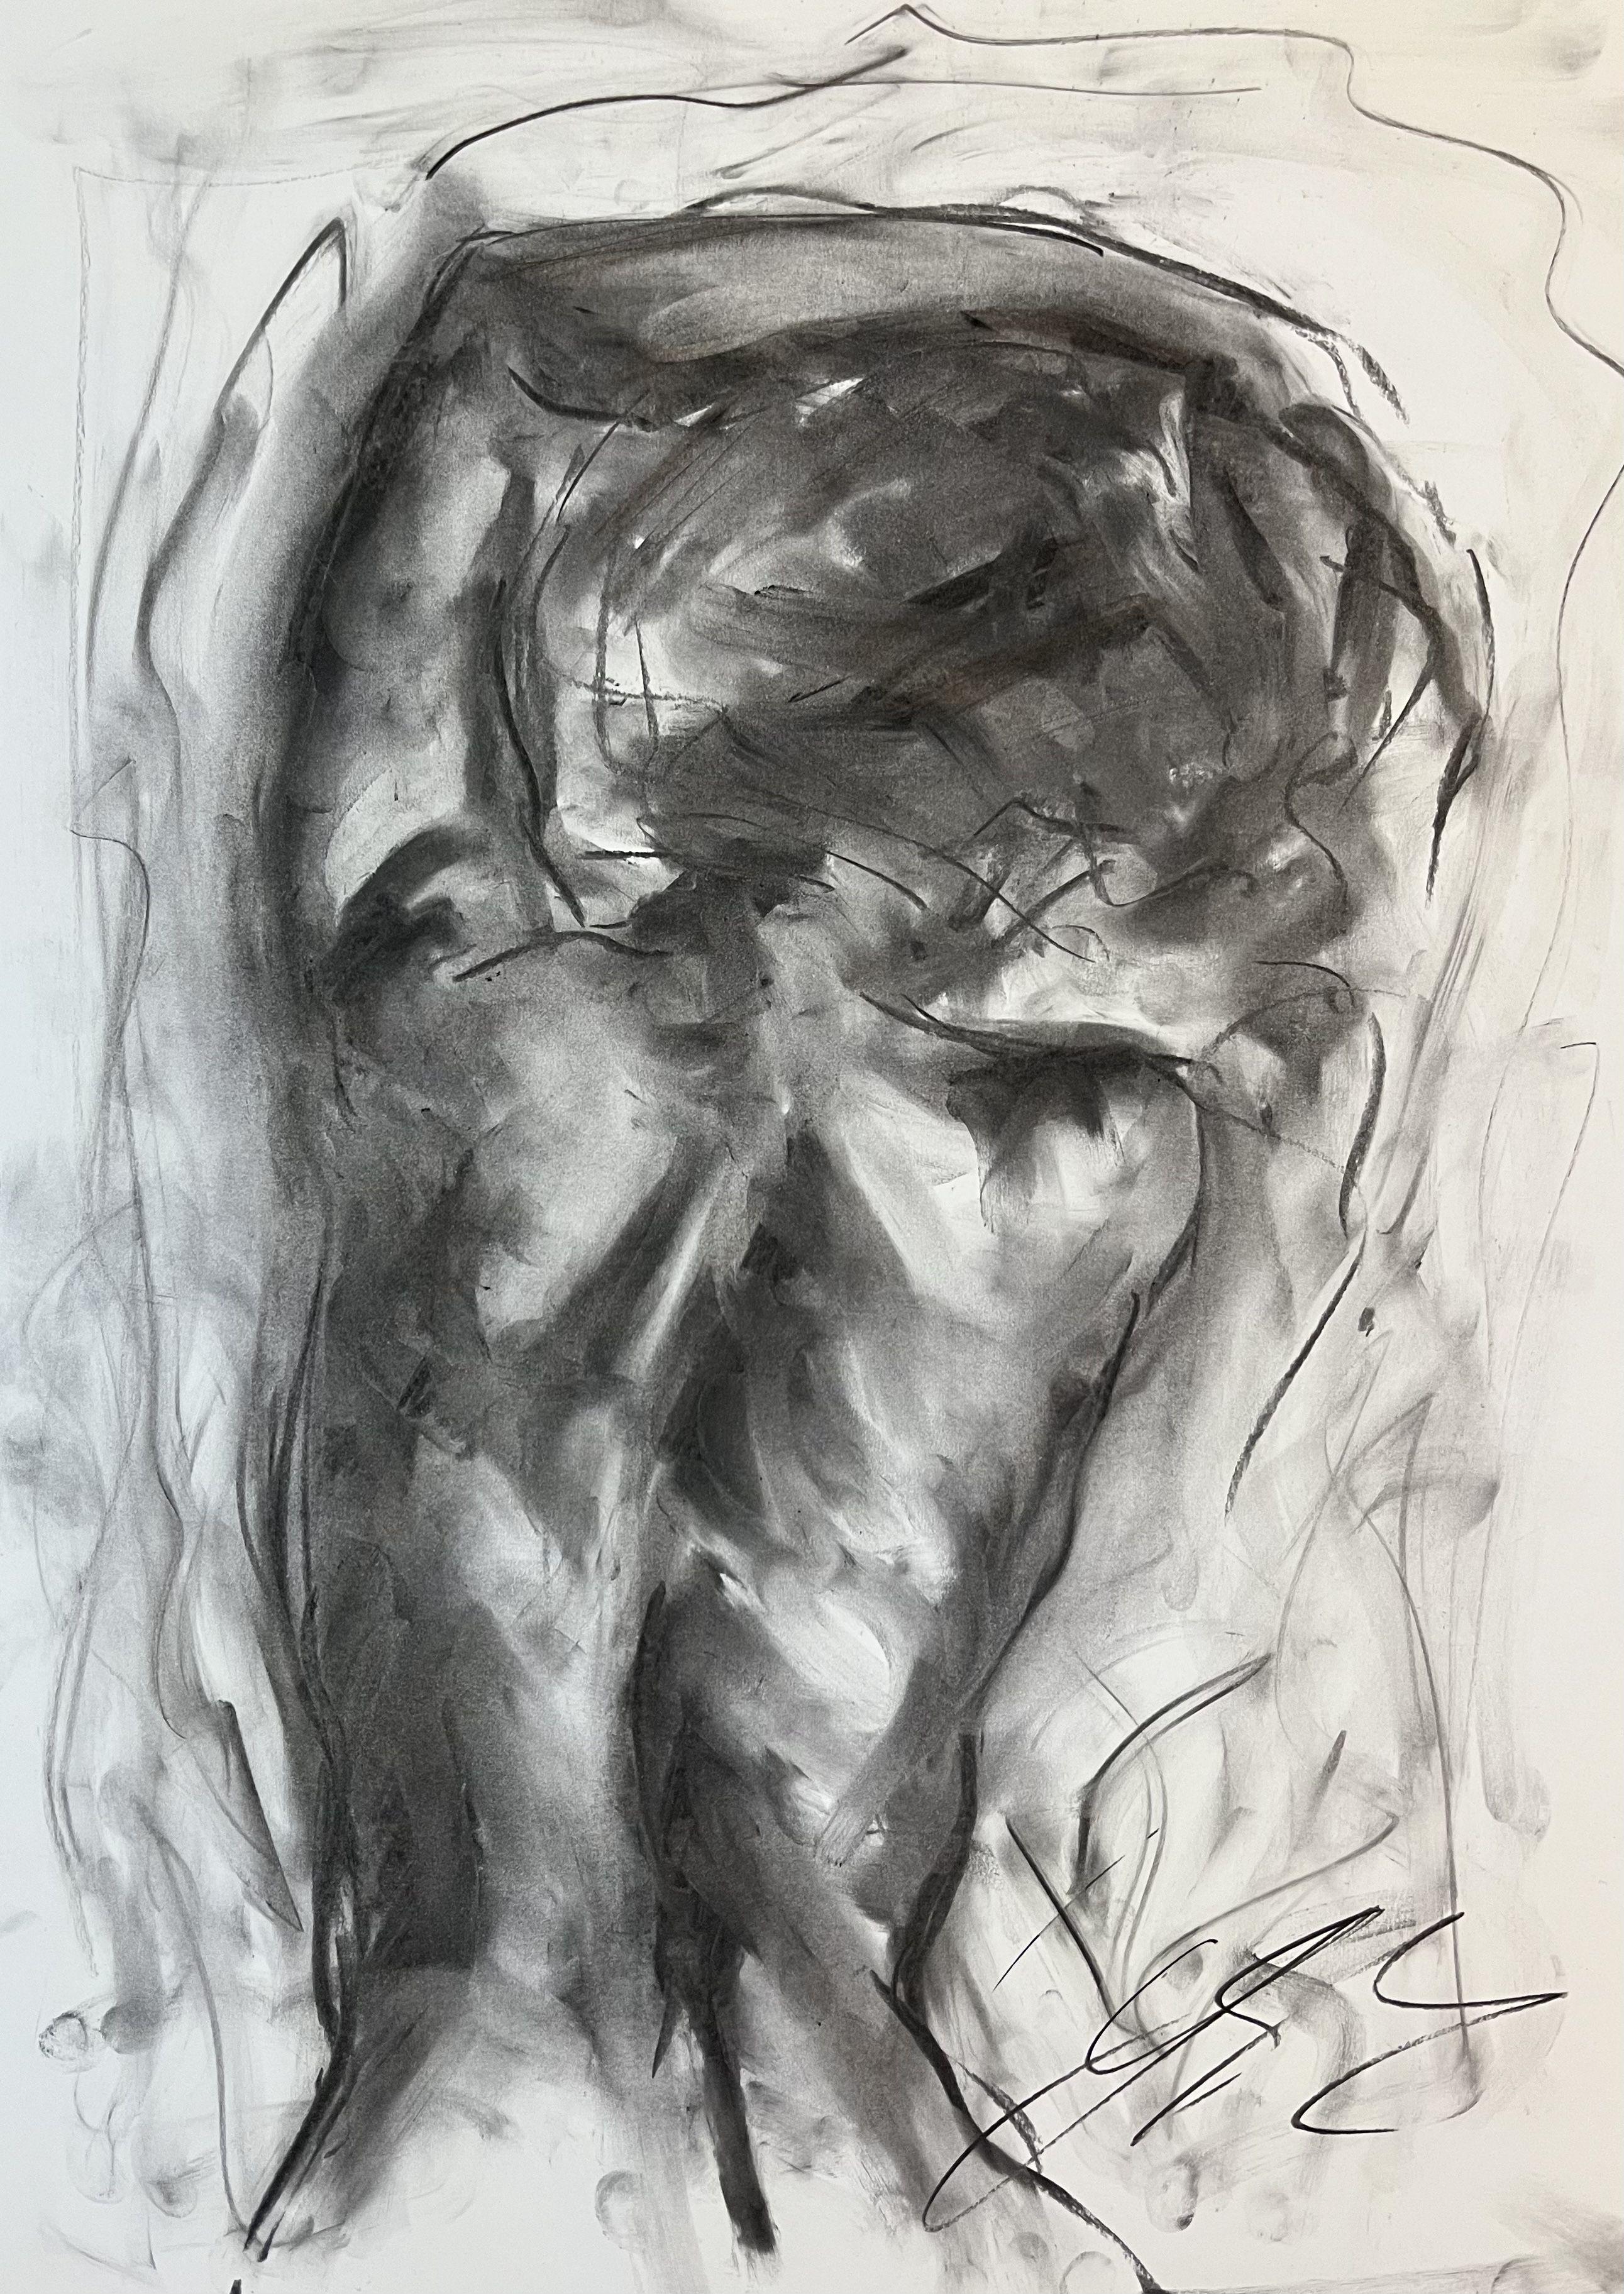 Dancer, Drawing, Charcoal on Paper - Art by James Shipton